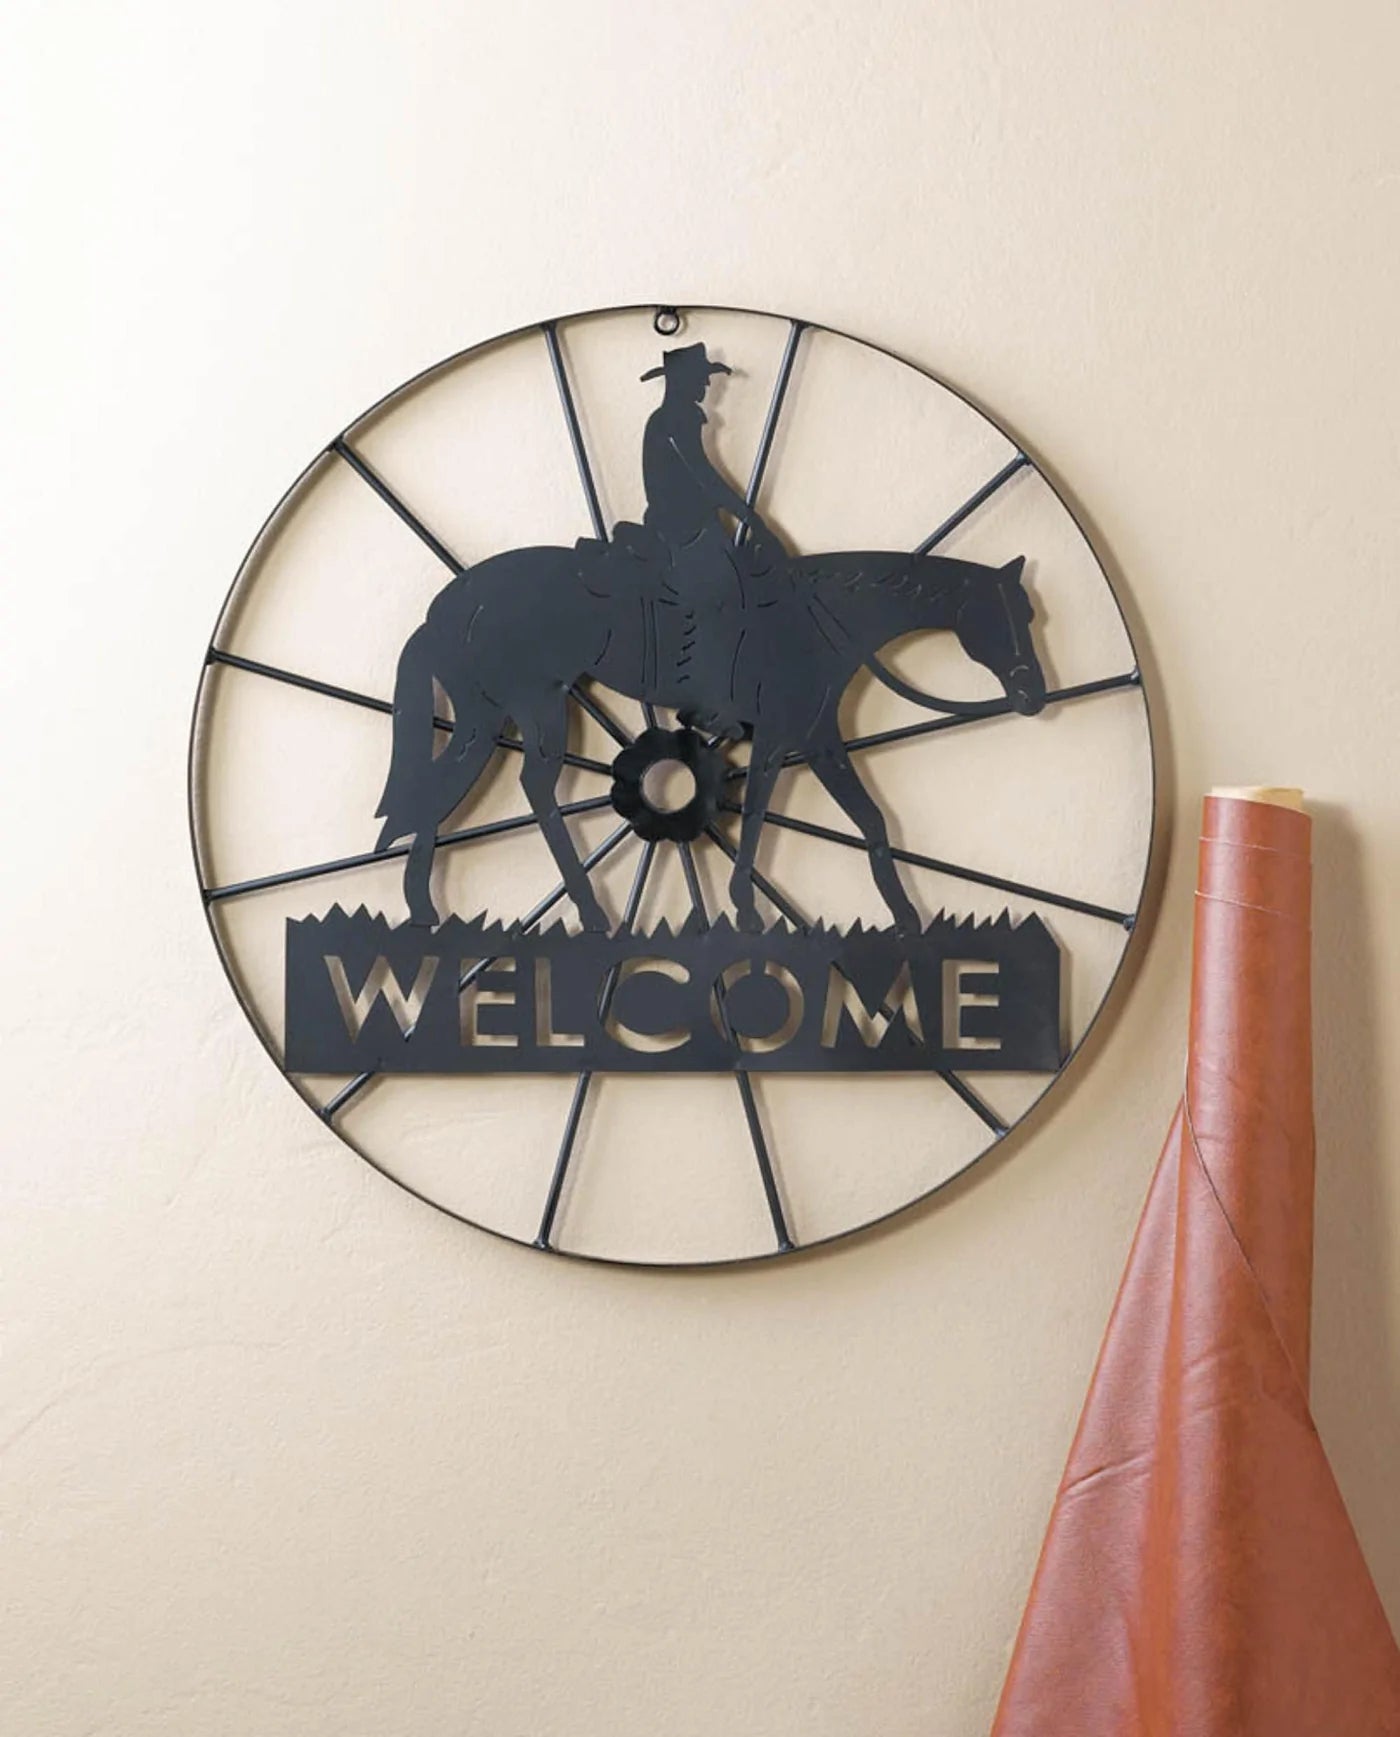 Cowboy Welcome Wheel Sign